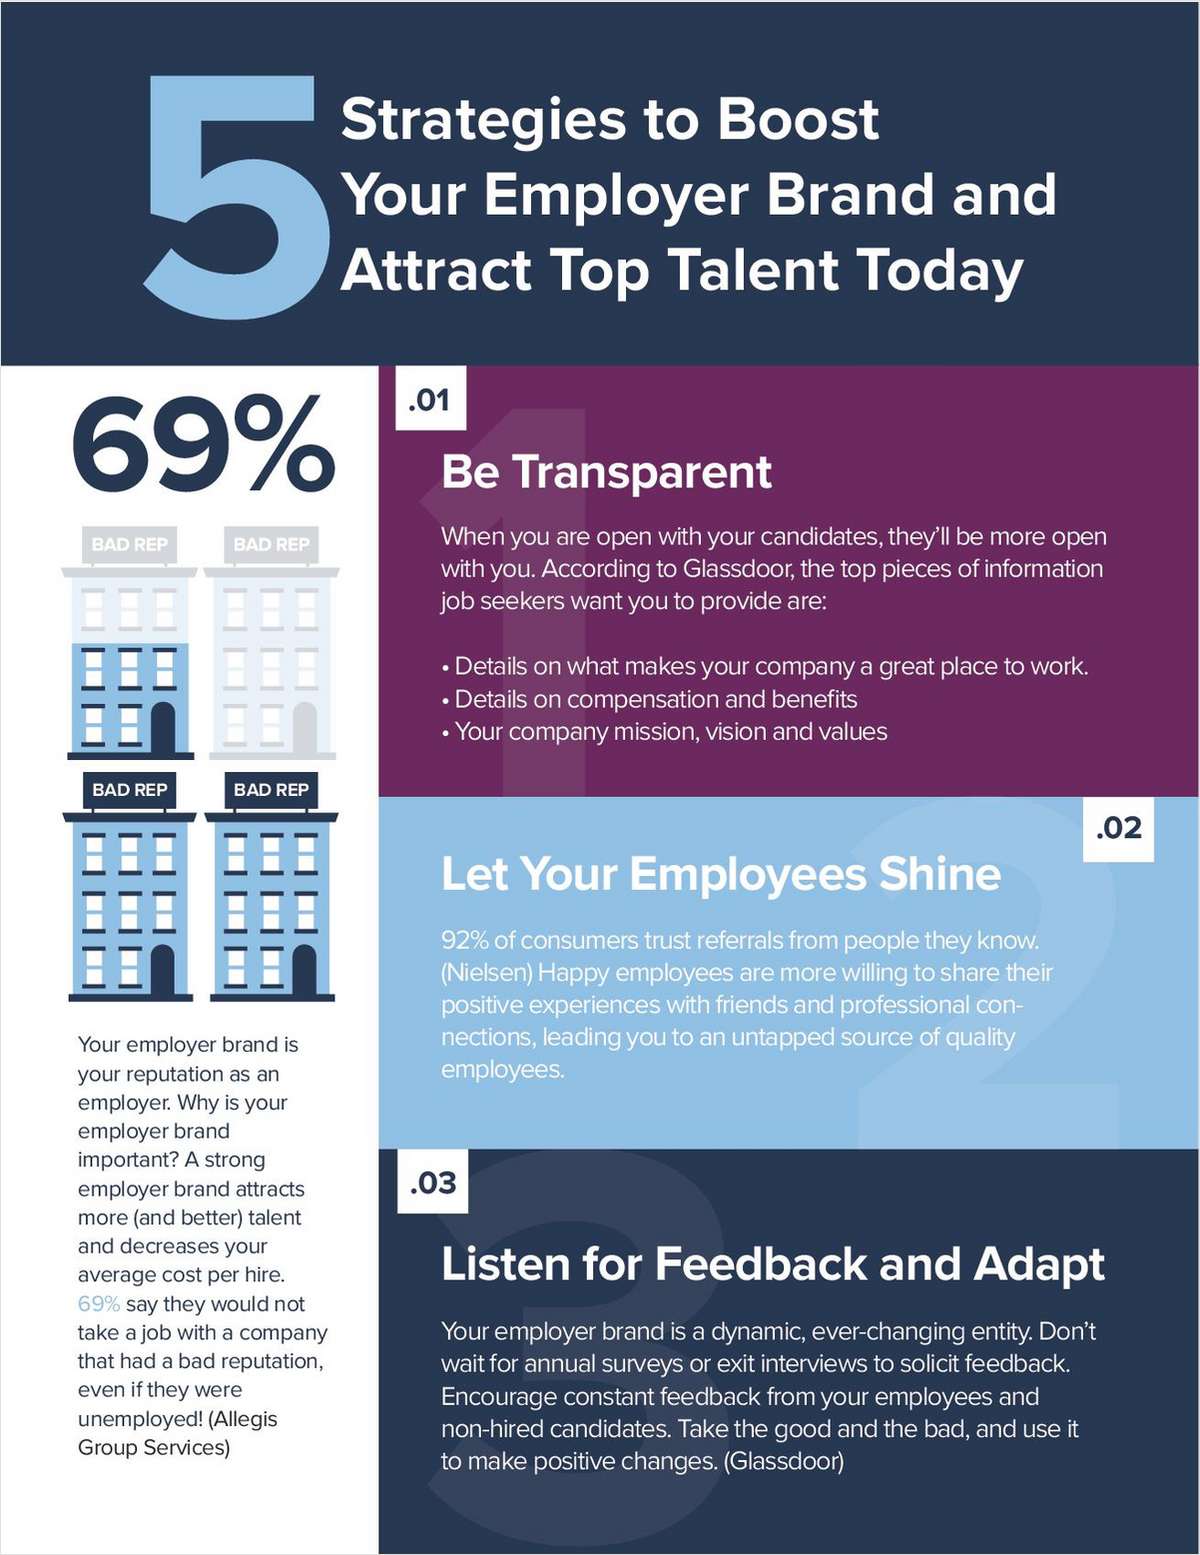 5 Strategies to Boost Your Employer Brand & Attract Top Talent Today